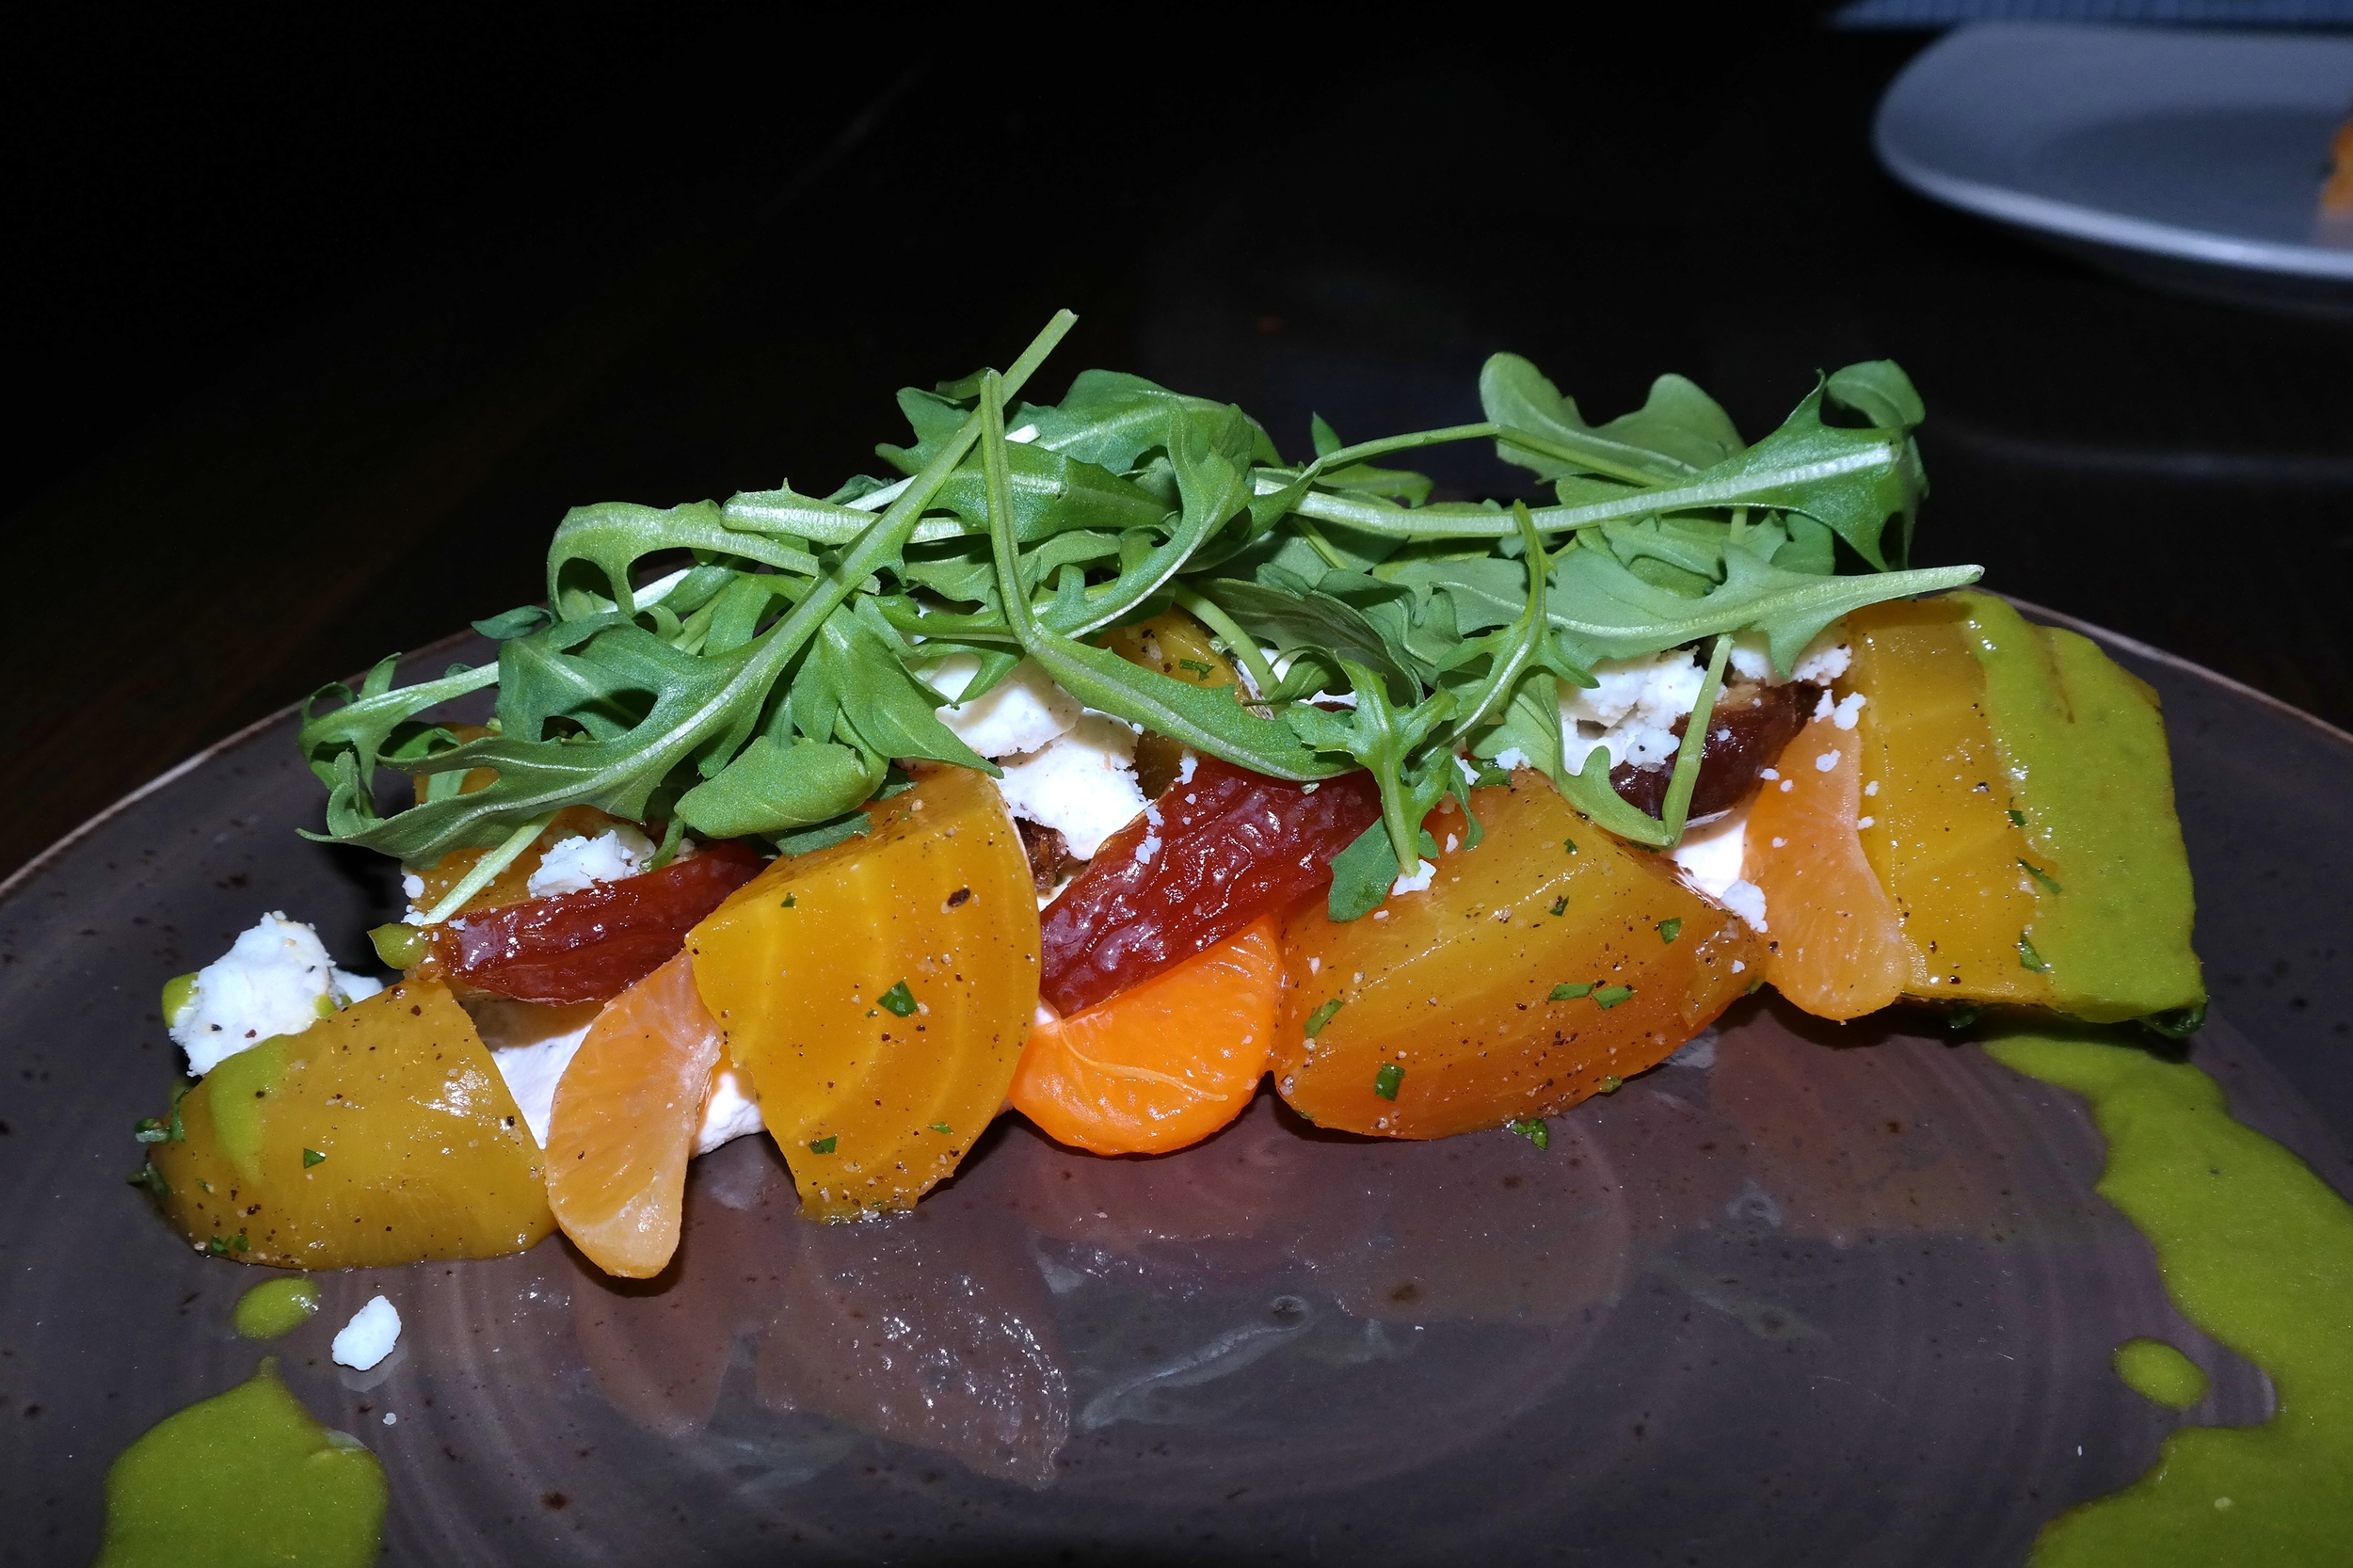 Roasted beet salad with Medjool dates, arugula, clementine, and Crow's Dairy black pepper feta